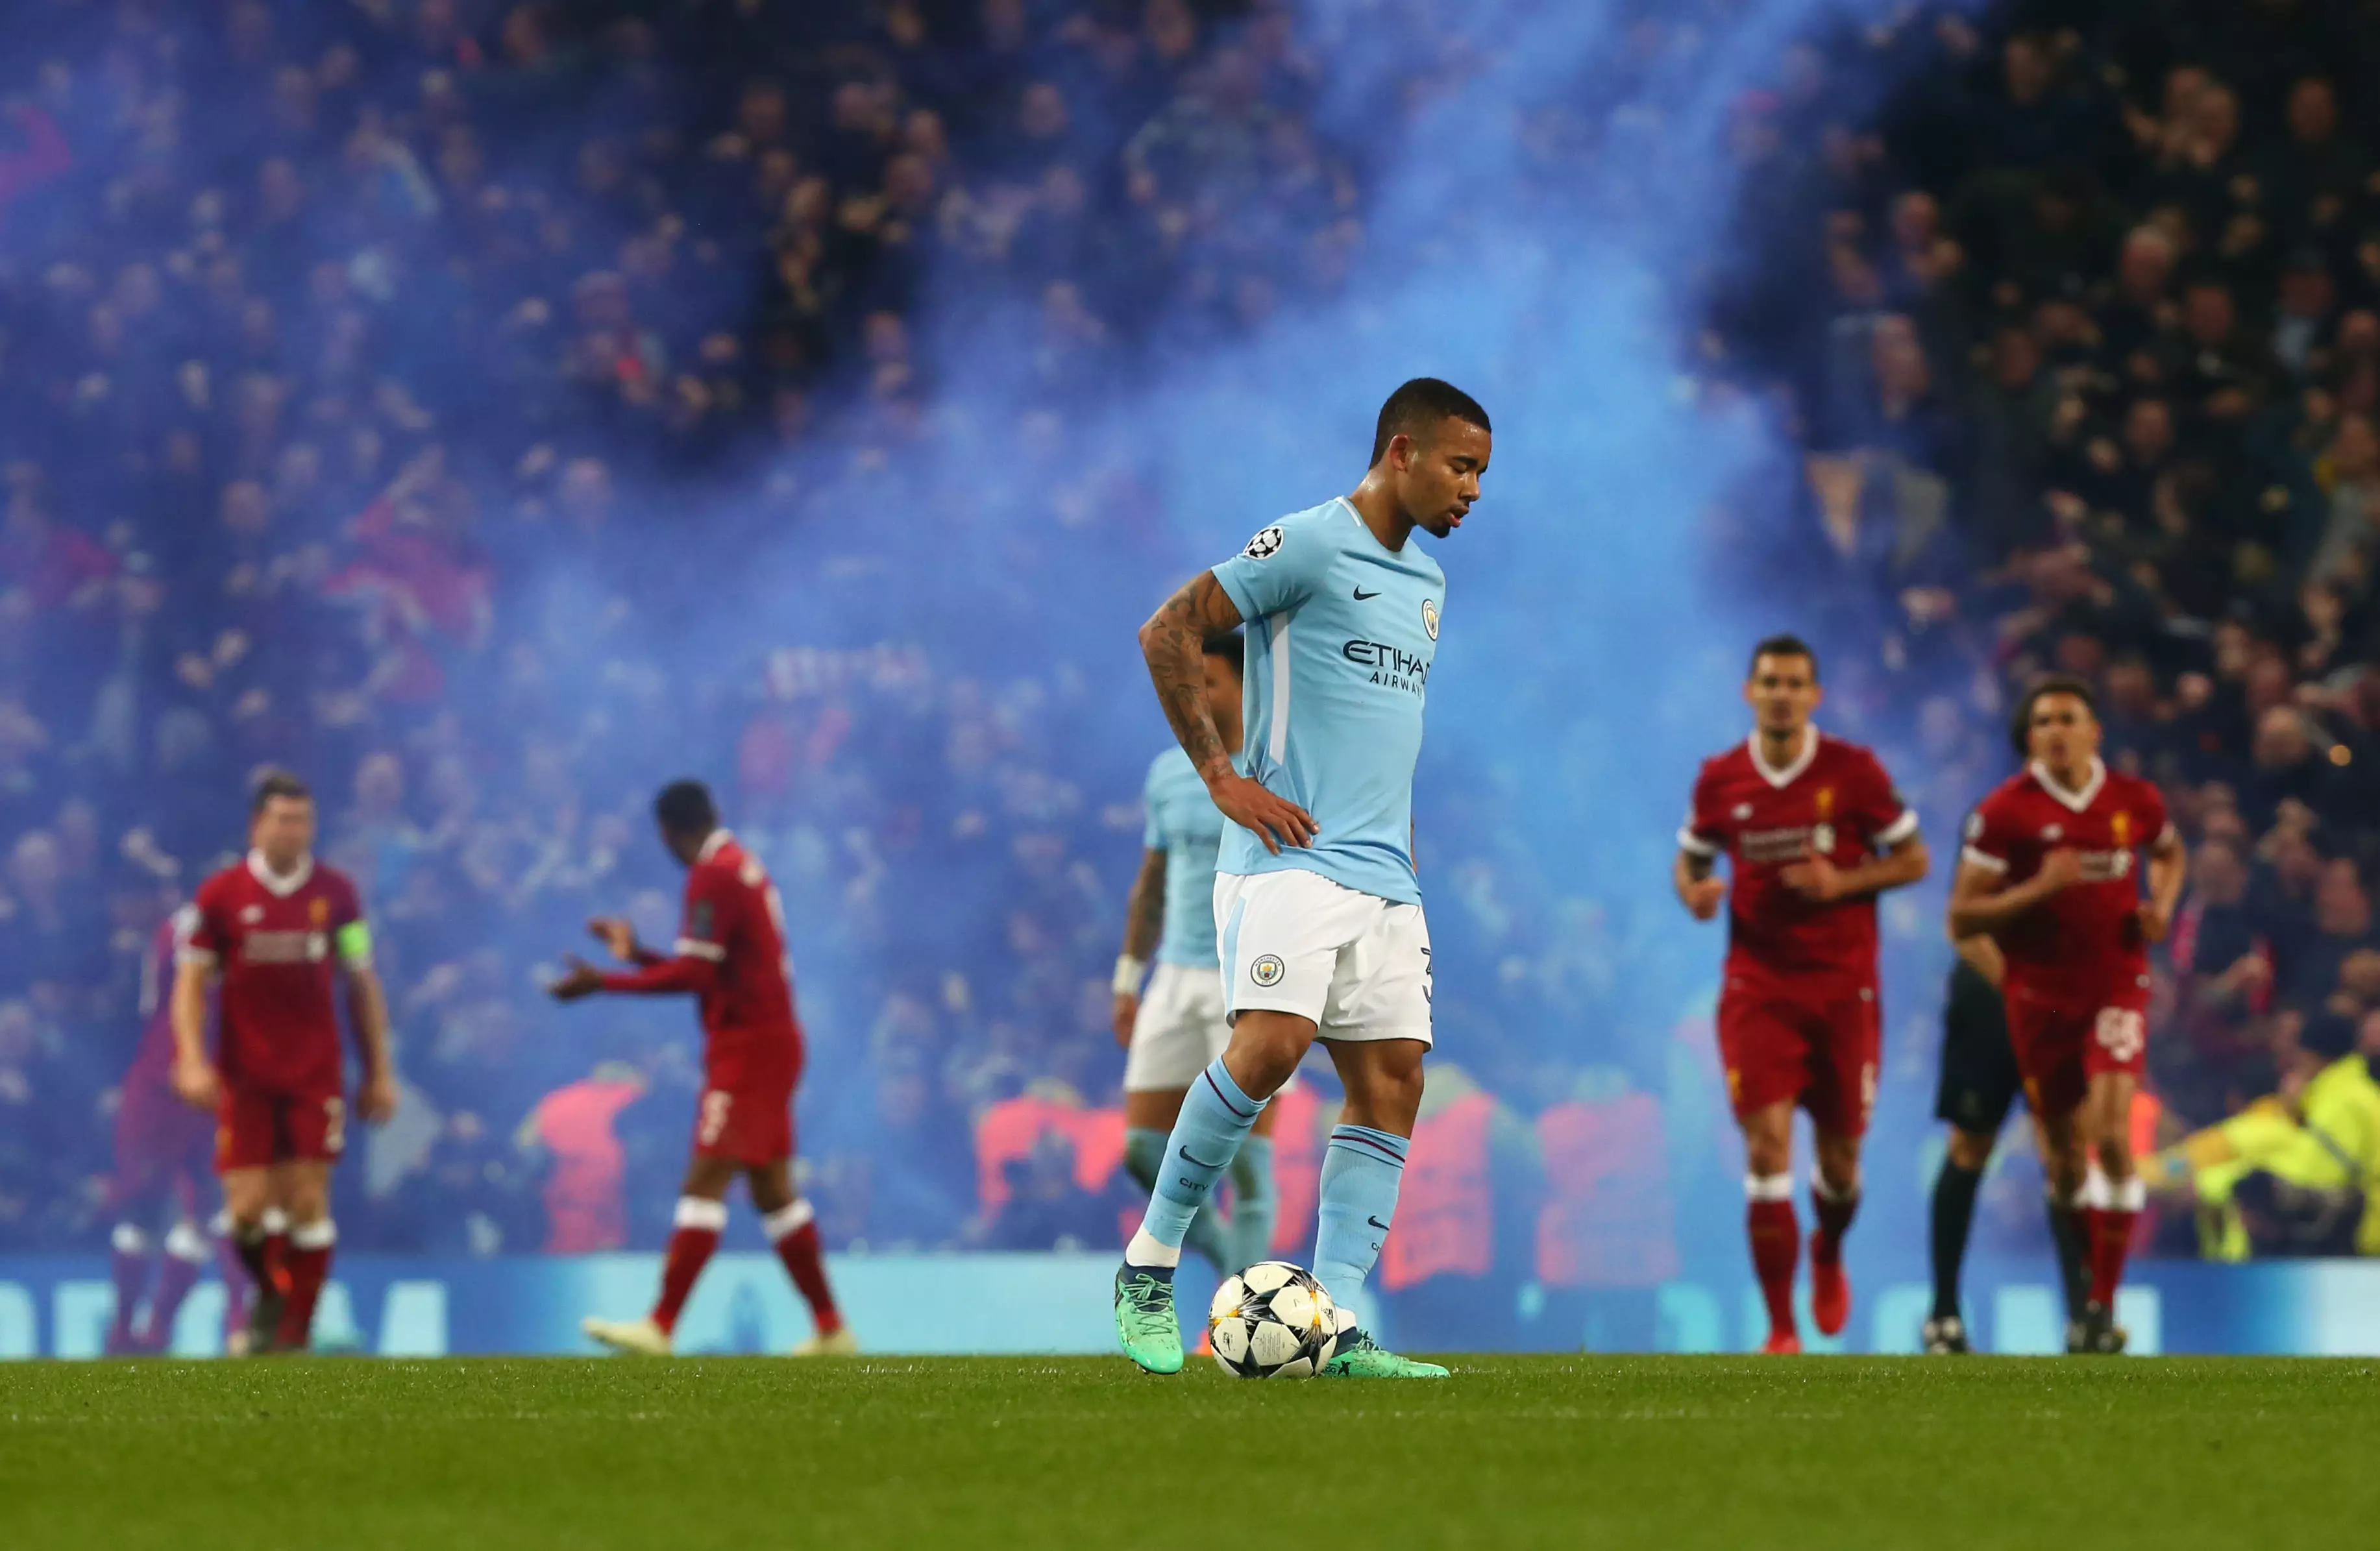 City were knocked out of last season's Champions League by Liverpool. Image: PA Images